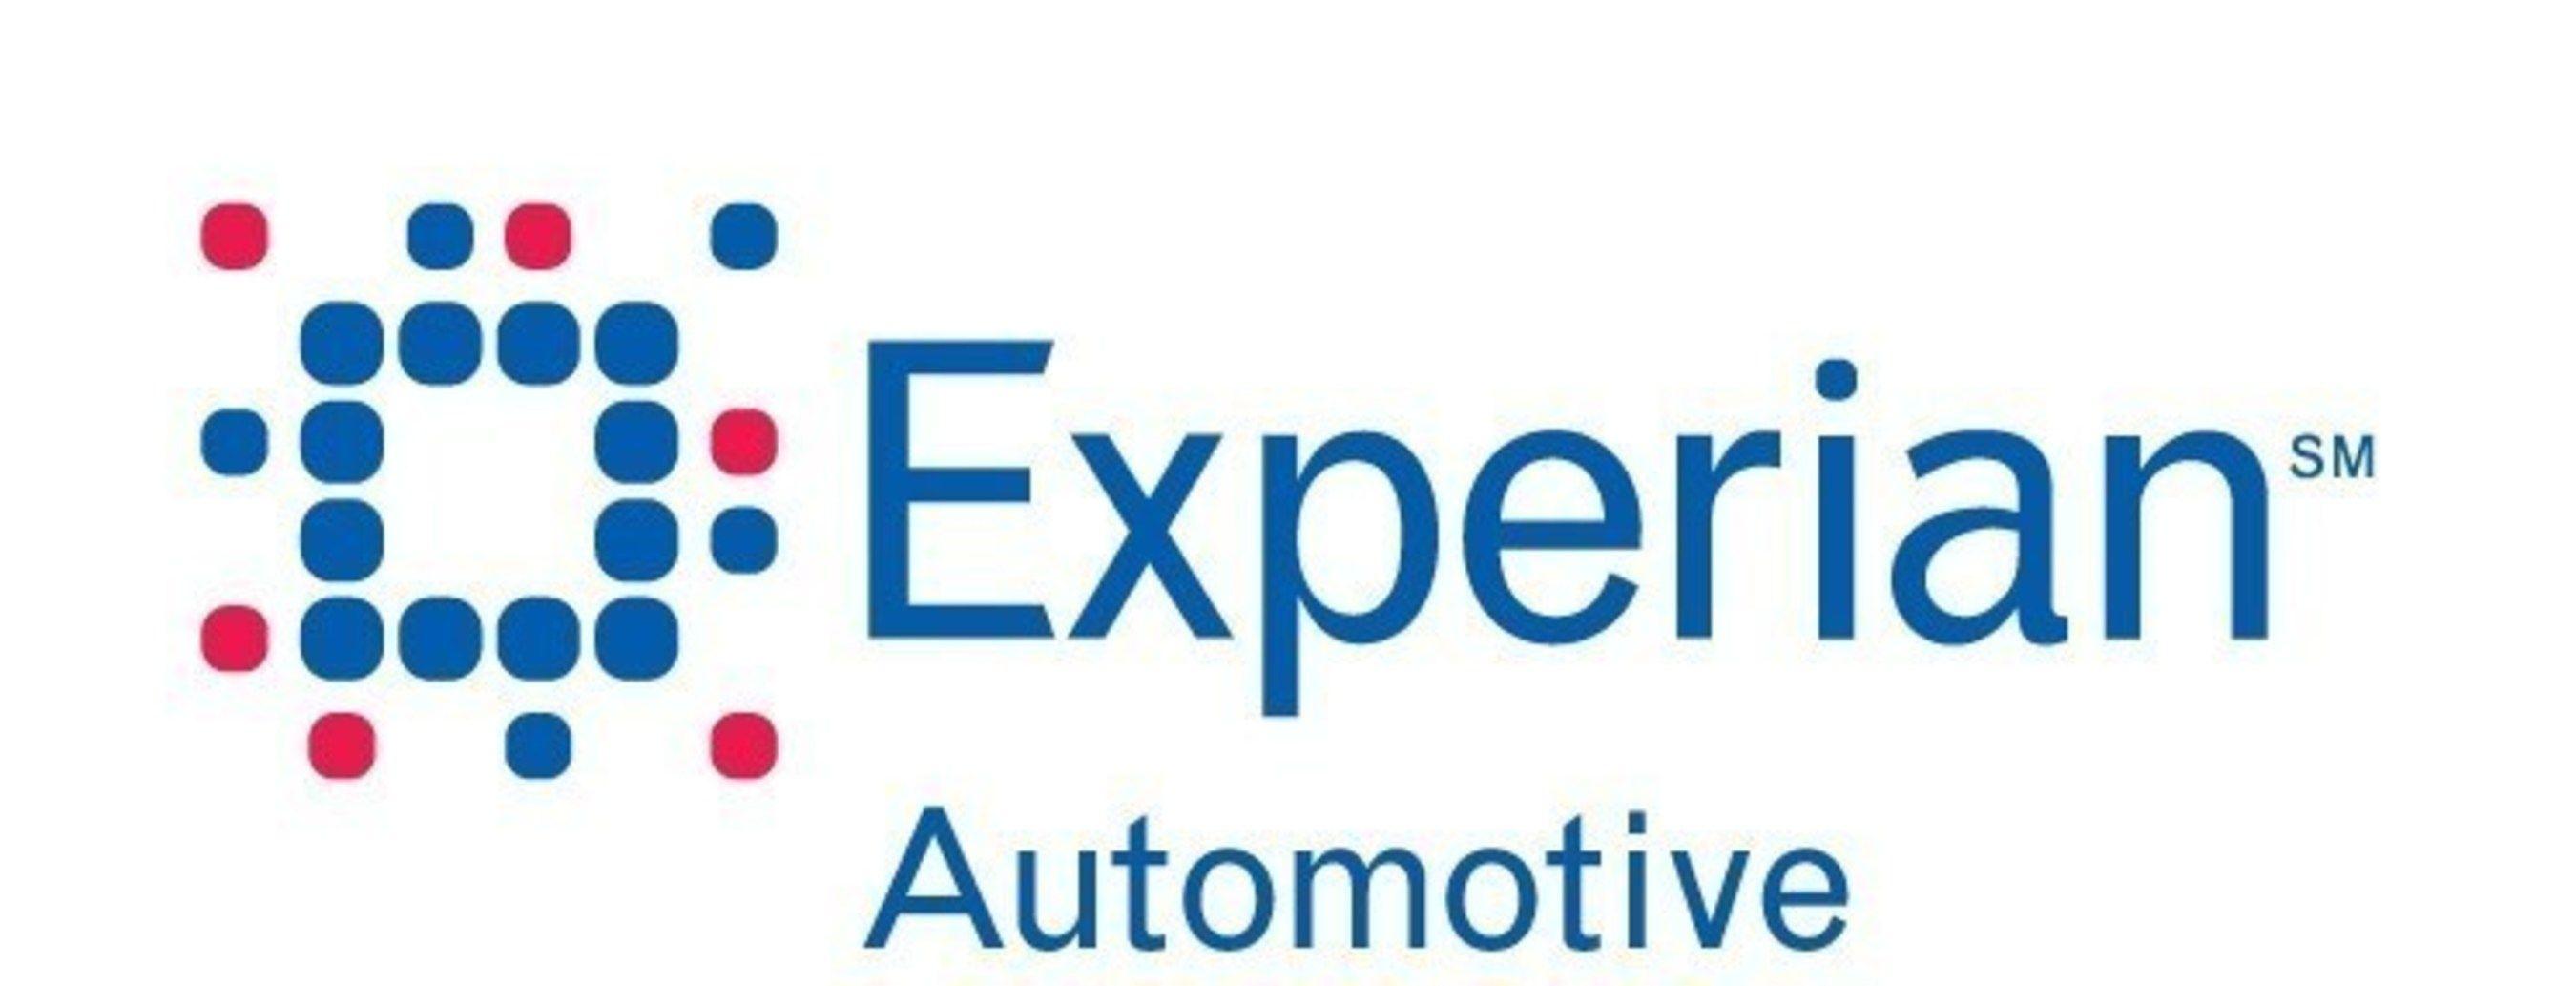 Experian Automotive Logo - Experian speaks at Used Car Week Conferences in Las Vegas